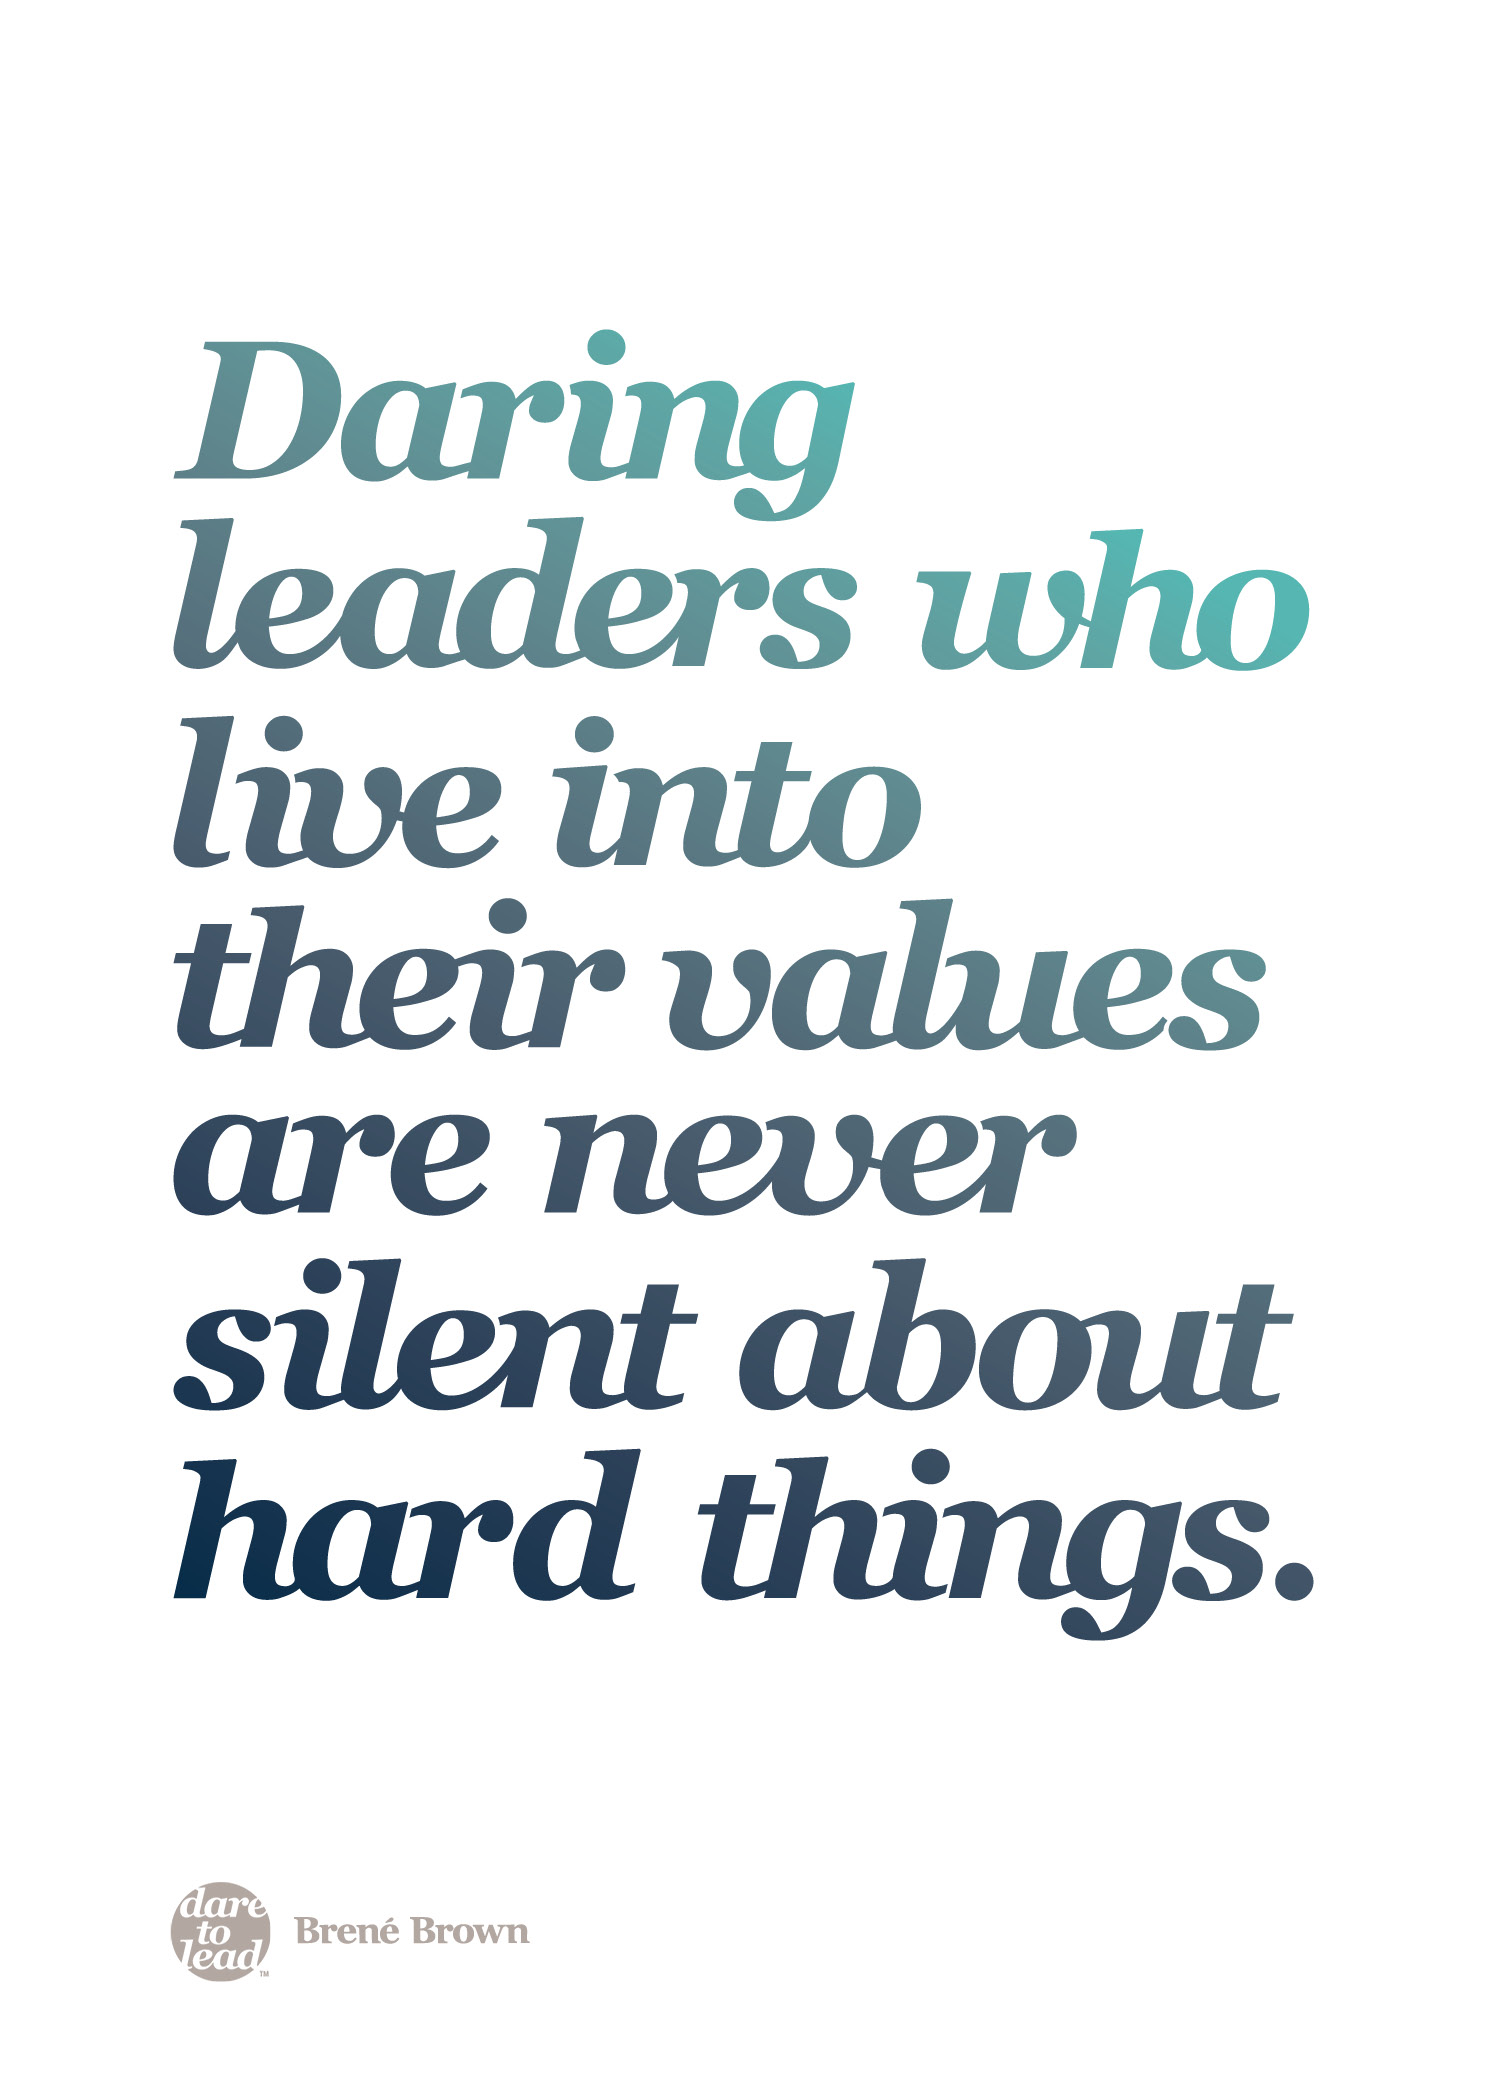 A quote from Brené Brown reading &quot;Daring leaders who live into their values are never silent about hard things&quot;